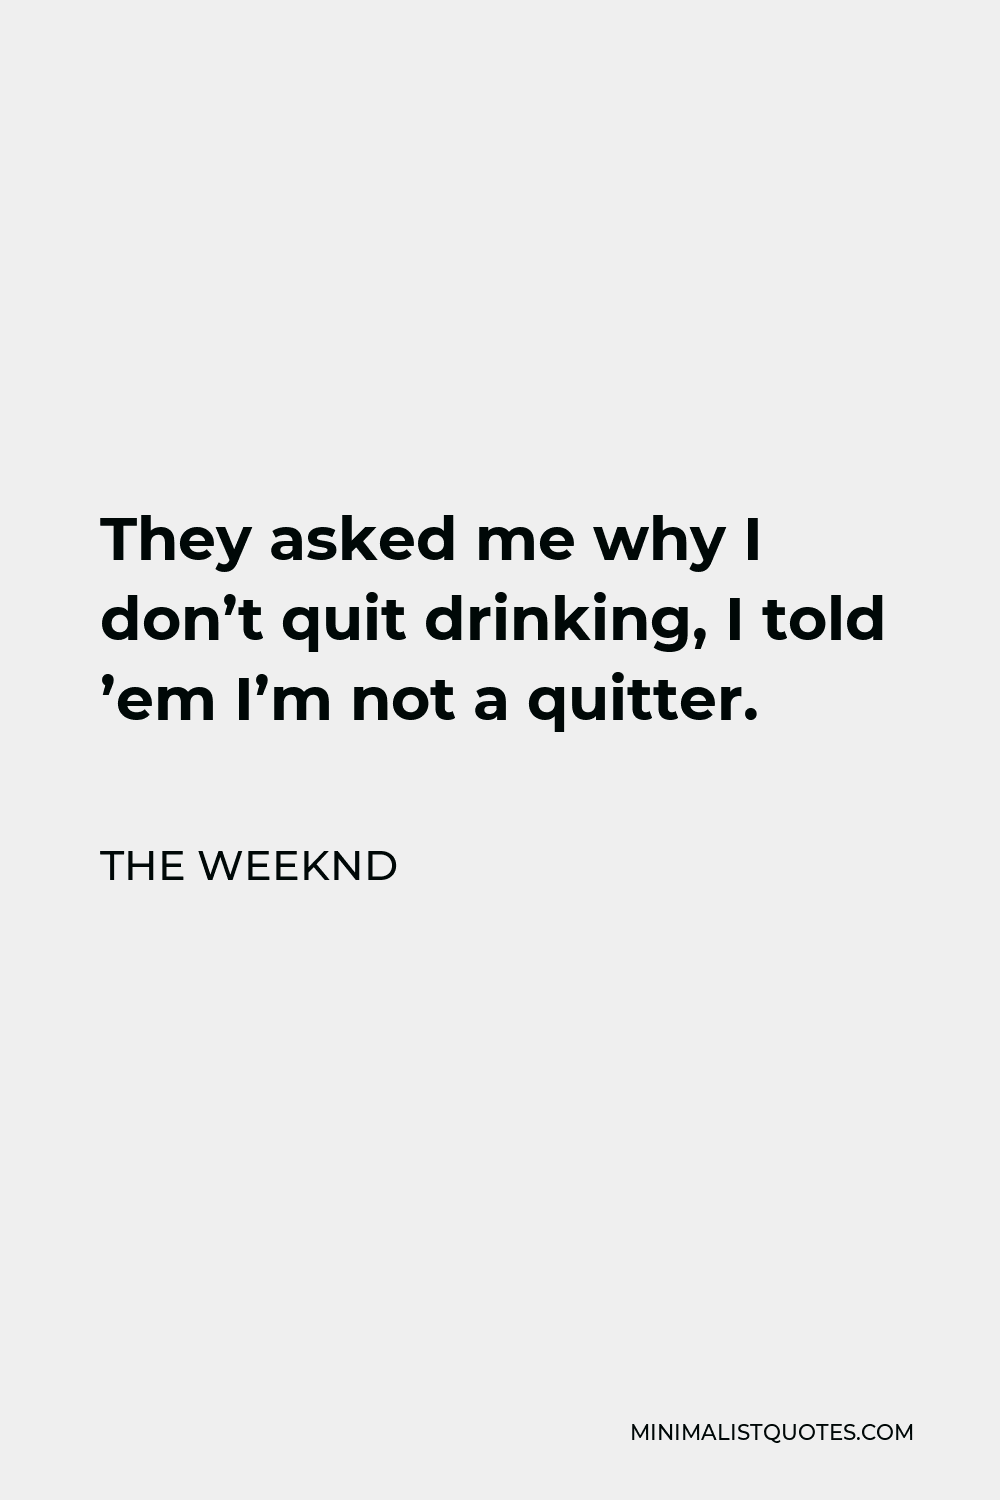 The Weeknd Quote - They asked me why I don’t quit drinking, I told ’em I’m not a quitter.